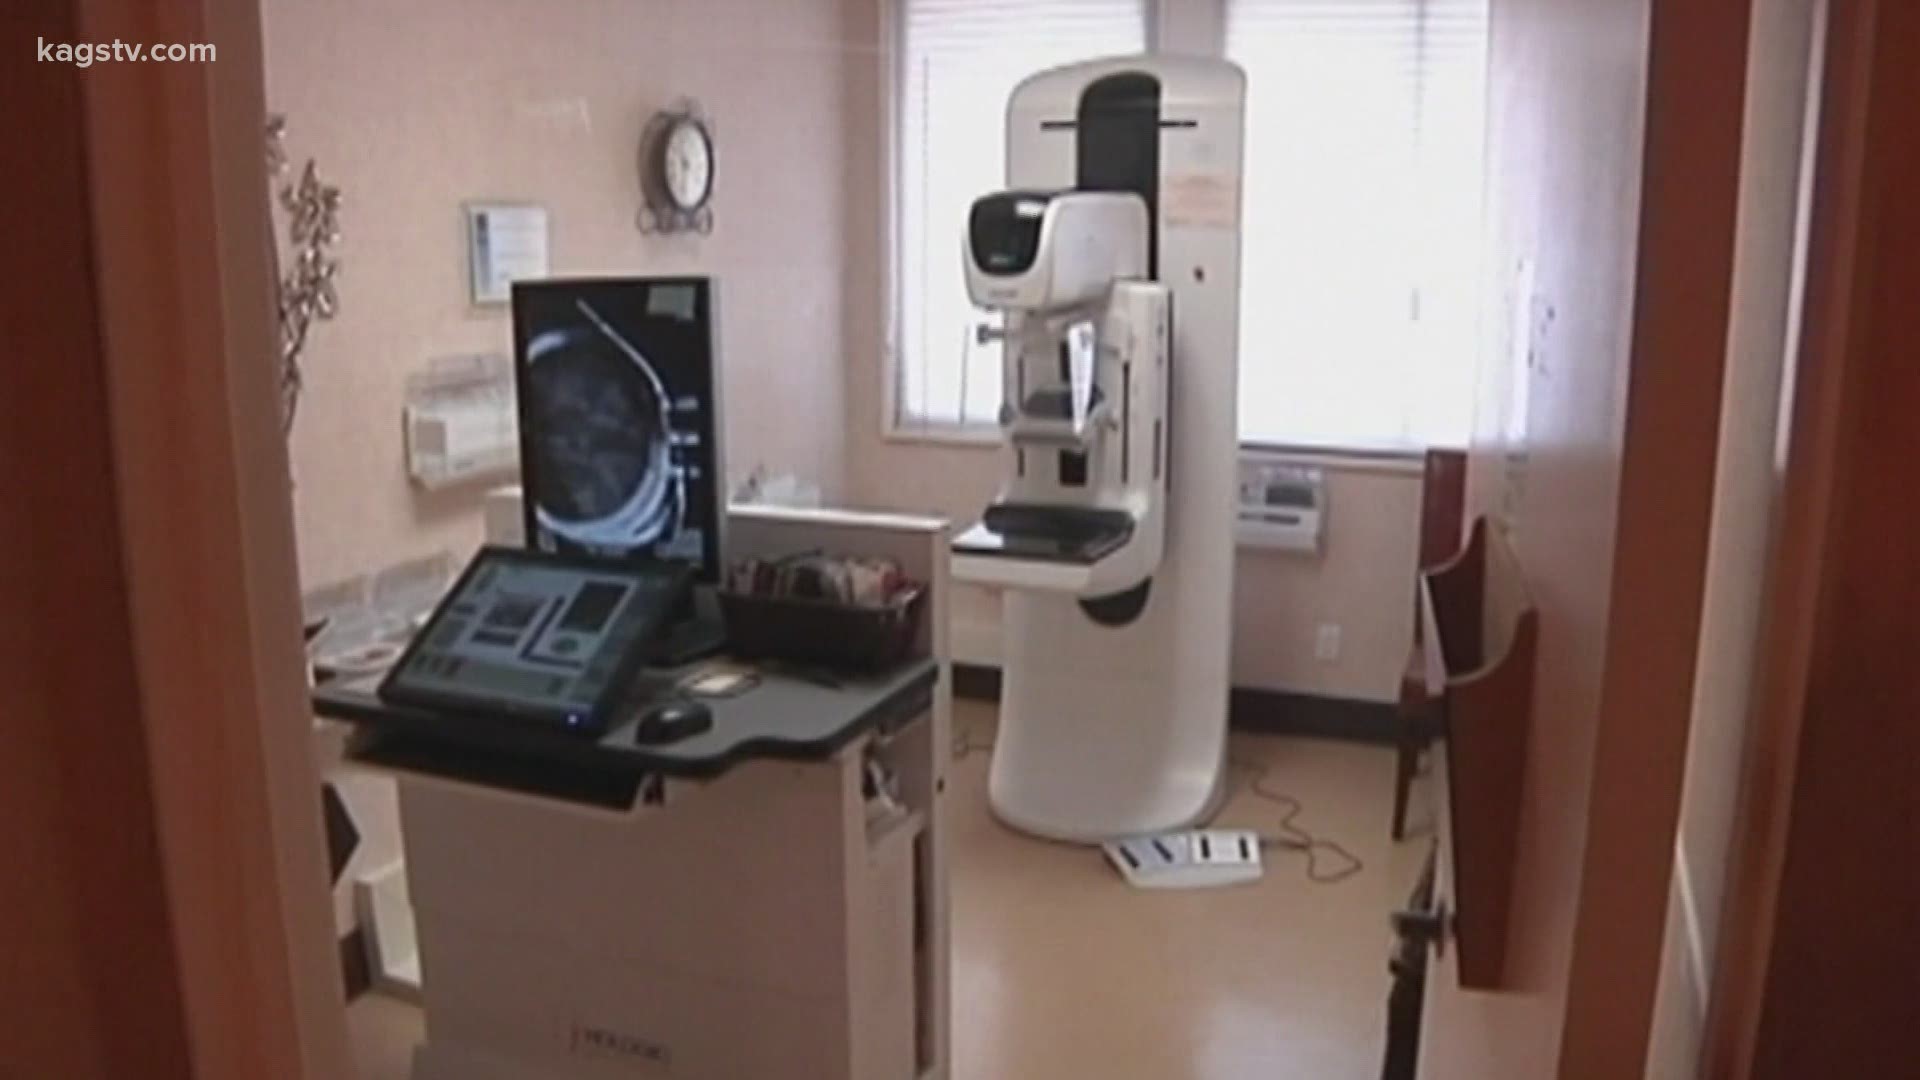 Most hospitals stopped health screenings during the shutdown, mammograms are back and patients are encouraged to go in.